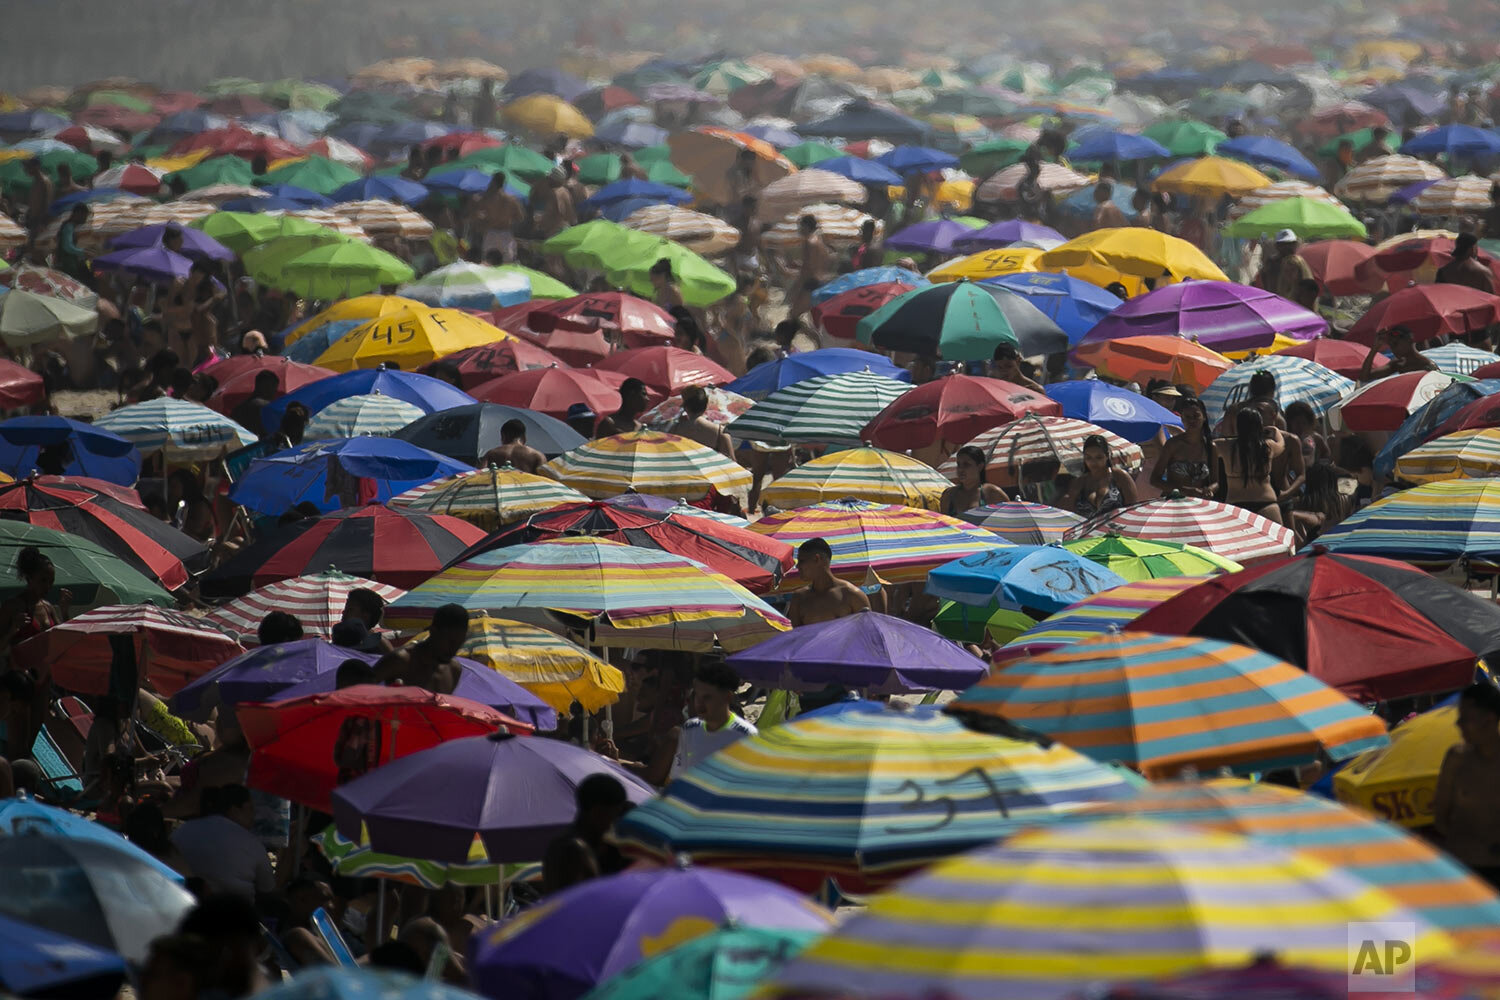  People crowd Ipanema beach amid the COVID-19 pandemic in Rio de Janeiro, Brazil, Sept.6, 2020. Brazilians are packing the beaches and bars during a long holiday weekend to indulge in normal life as the COVID-19 pandemic rages. (AP Photo/Bruna Prado)